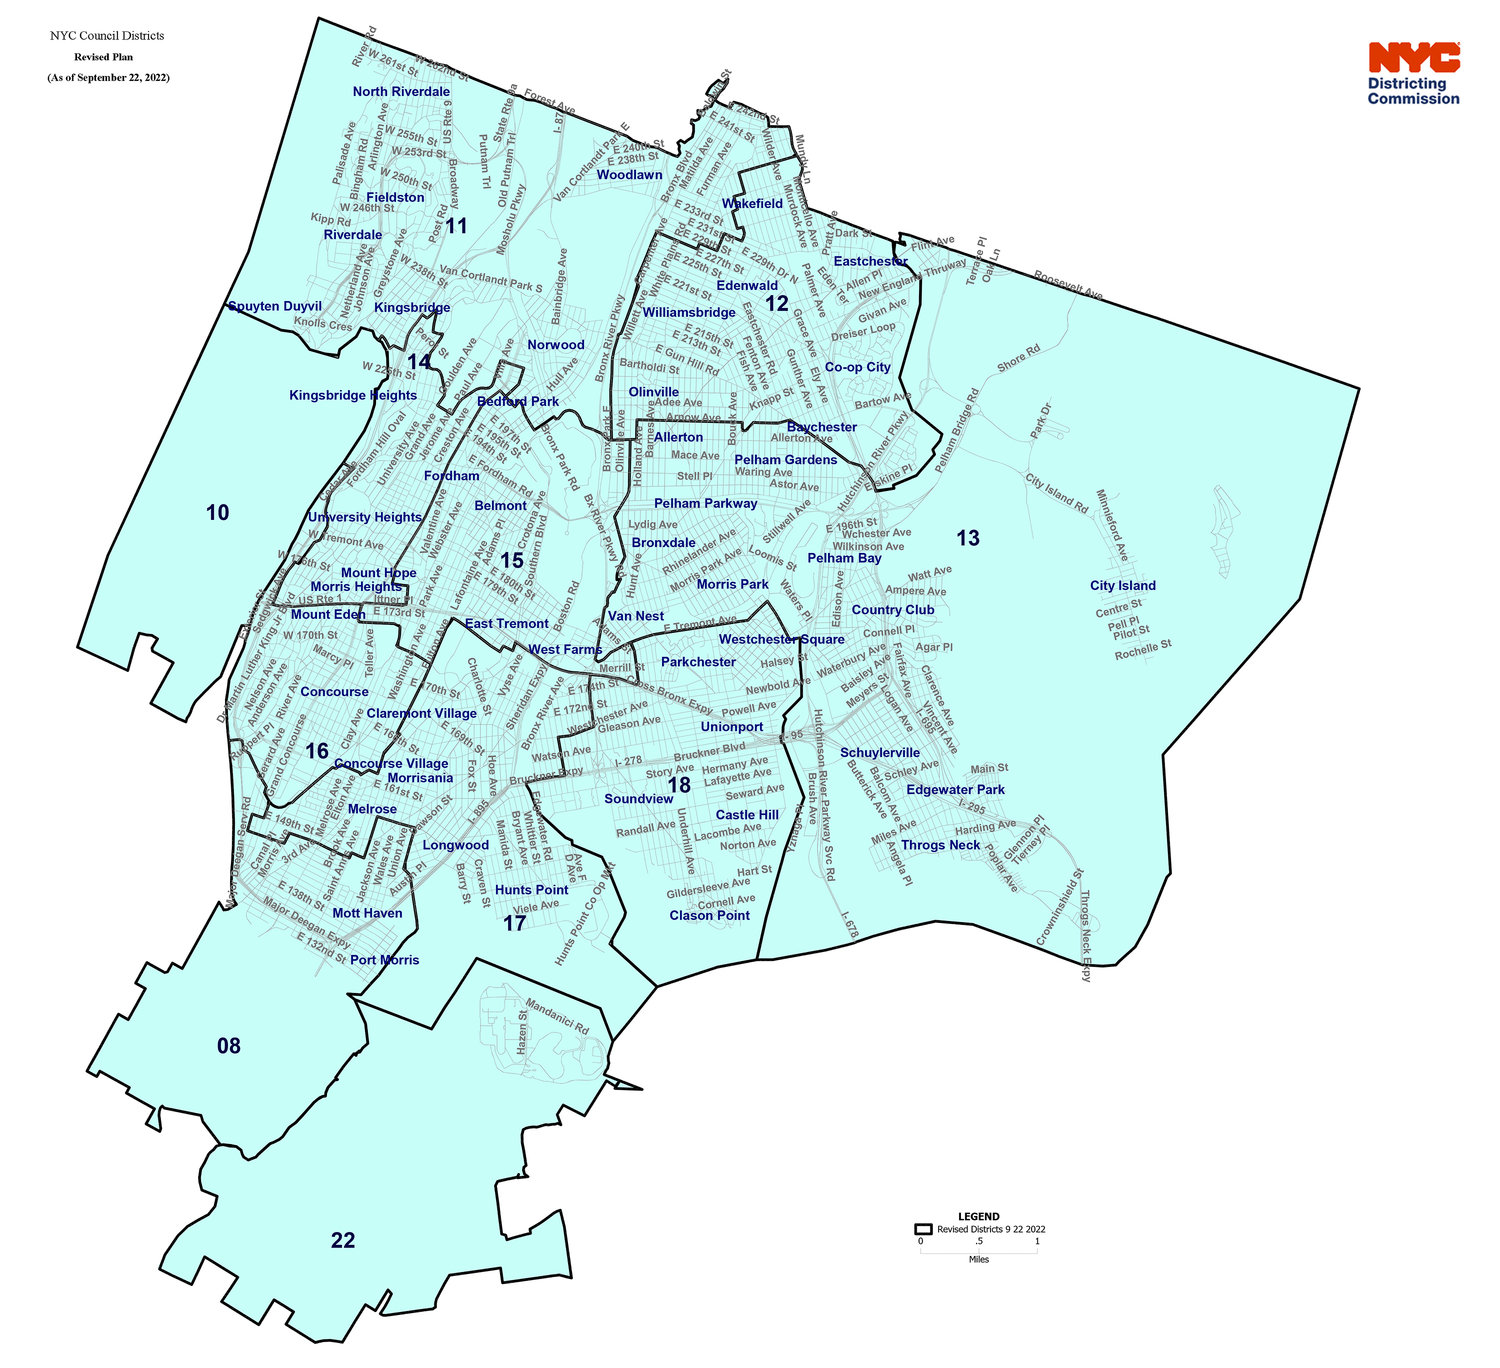 A draft version of the new city council district lines that were rejected by the same commission that drew them.